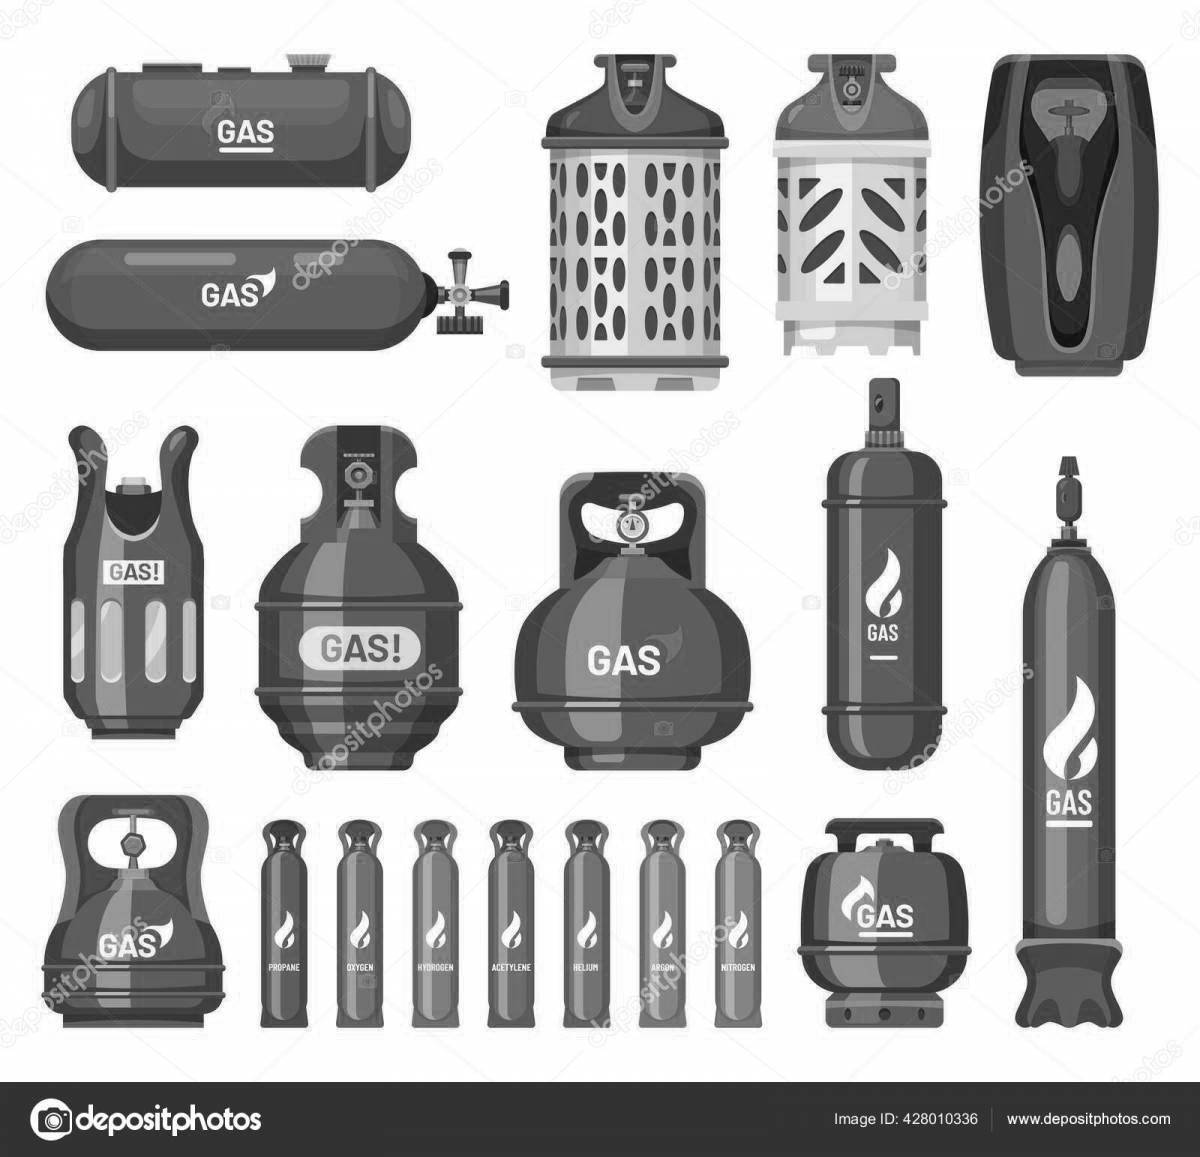 Coloring page dazzling gas cylinders